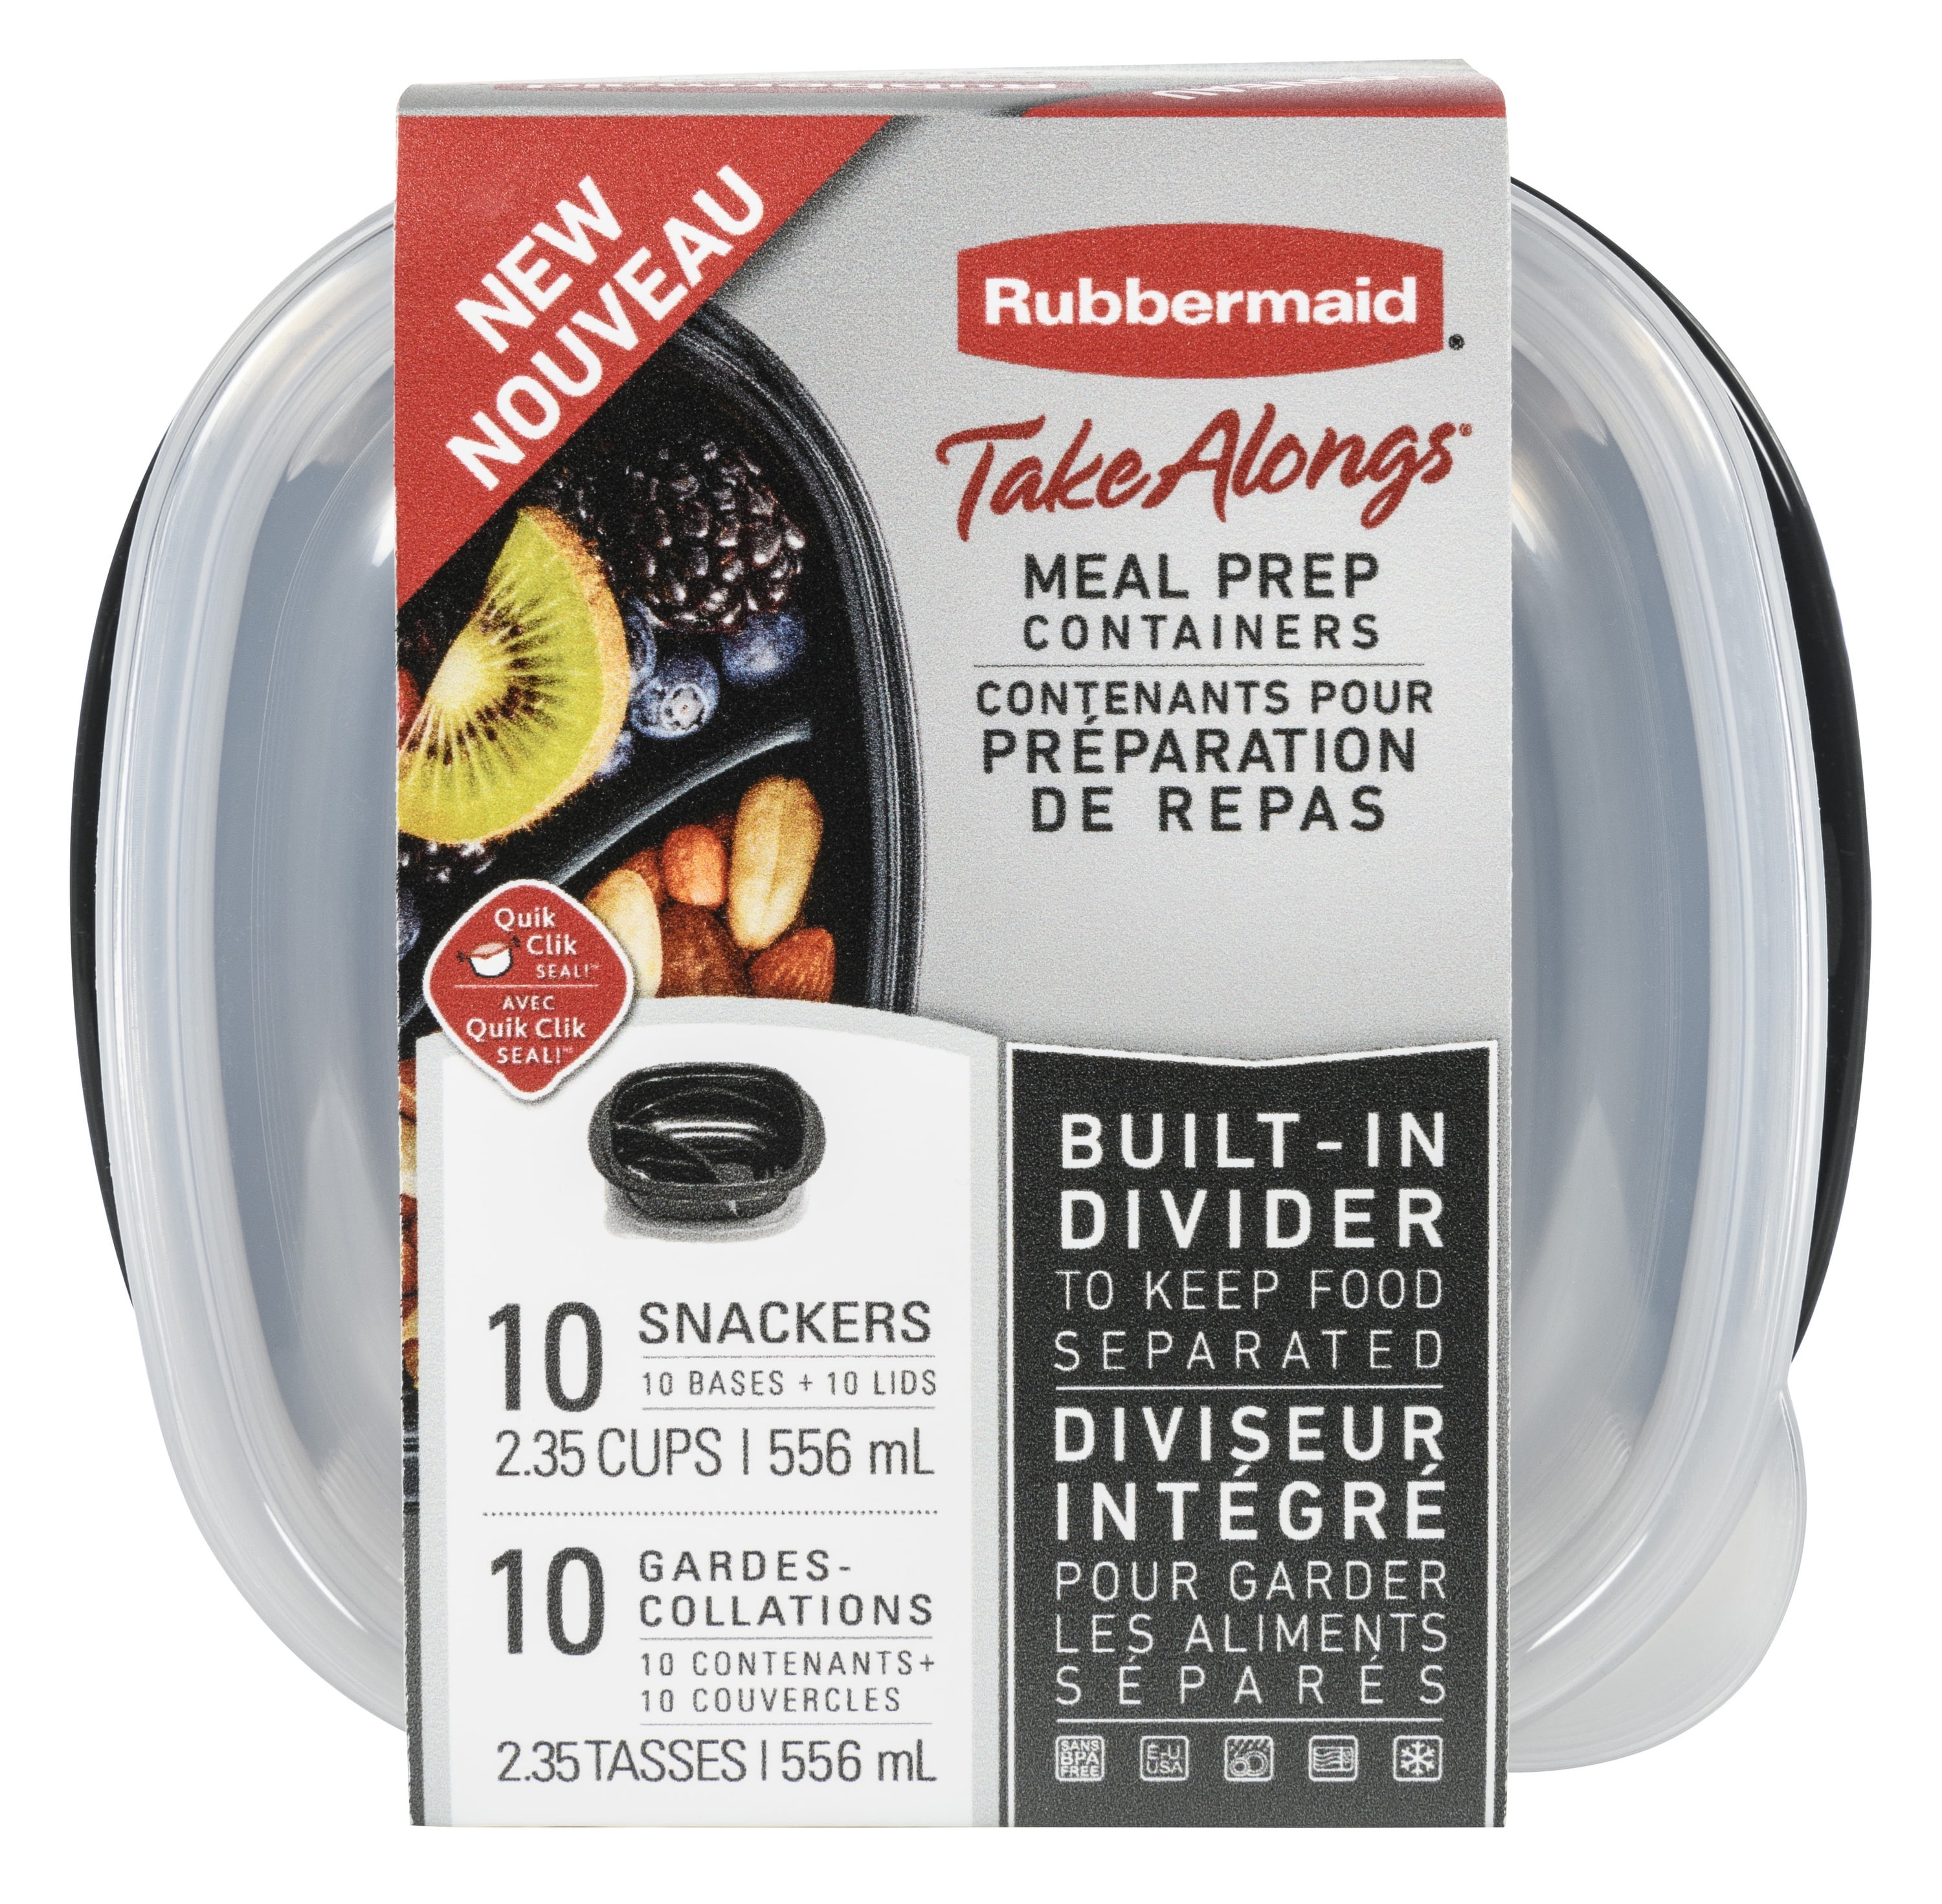 NWT Rubbermaid Take Alongs Meal Prep Containers Built in Dividers